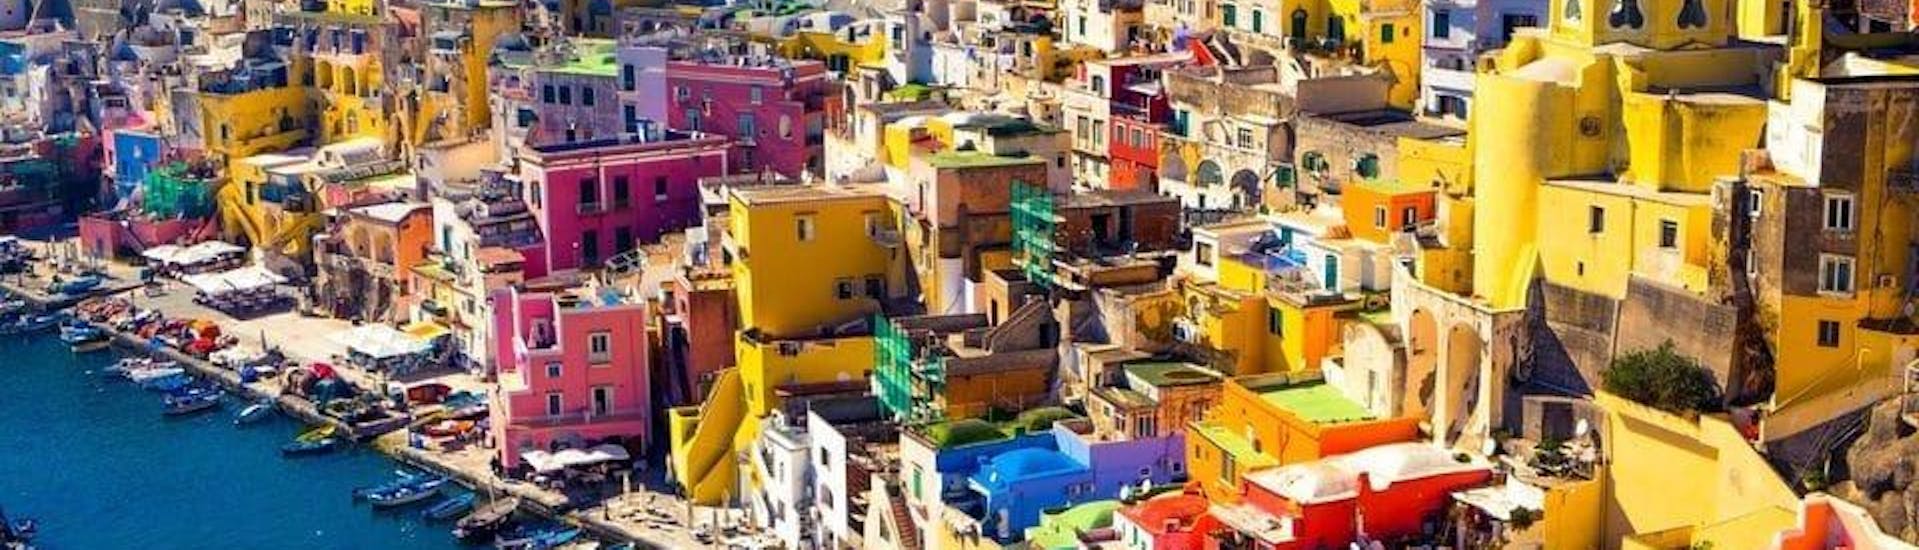 These tiny and colourful houses can be admired during the Boat Trip from Sorrento to Ischia and Procida.